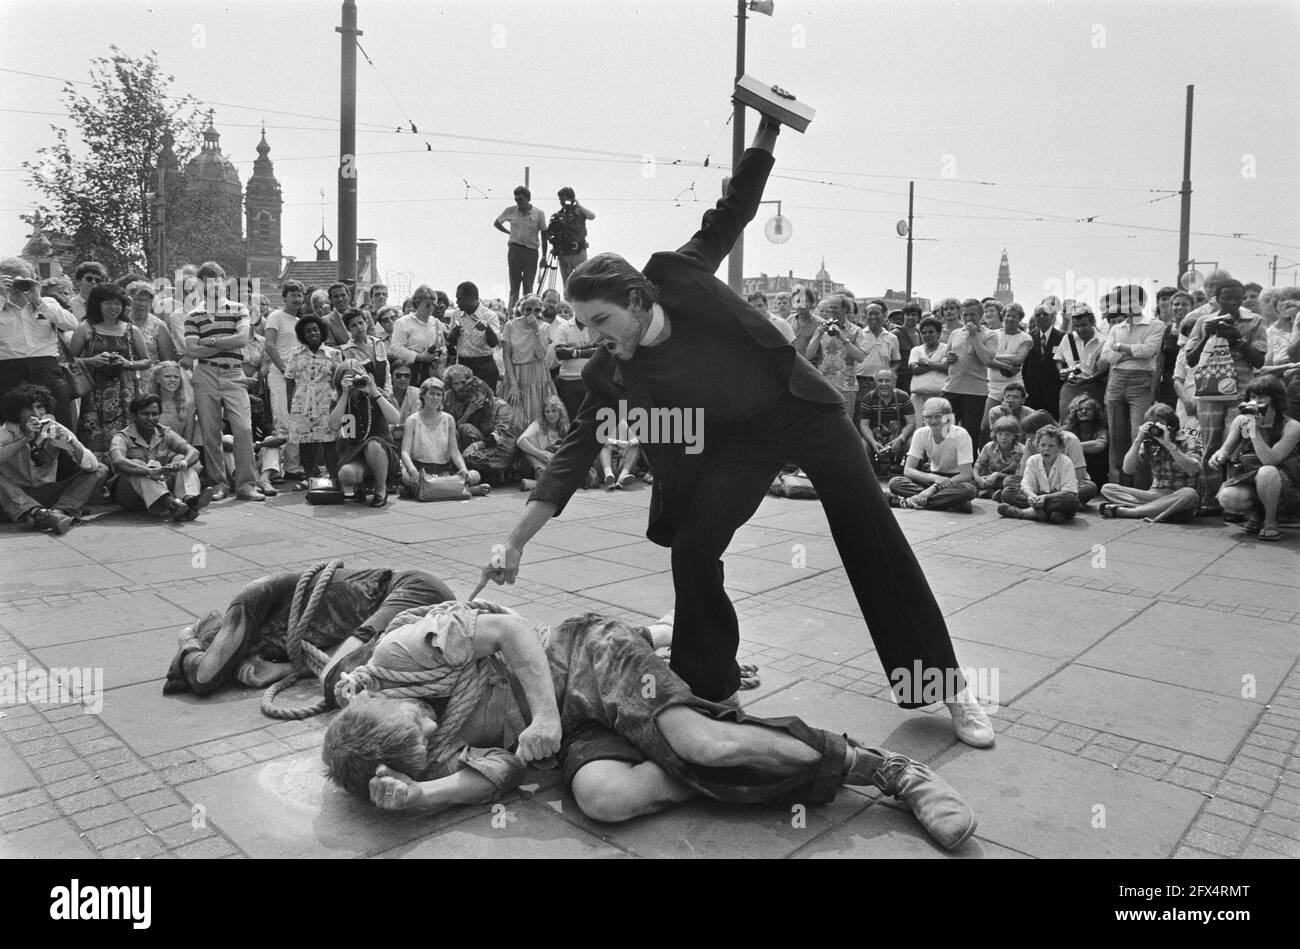 Evangelists perform a play to proclaim their message in front of Central Station, July 16, 1983, conferences, evangelism, street theater, The Netherlands, 20th century press agency photo, news to remember, documentary, historic photography 1945-1990, visual stories, human history of the Twentieth Century, capturing moments in time Stock Photo